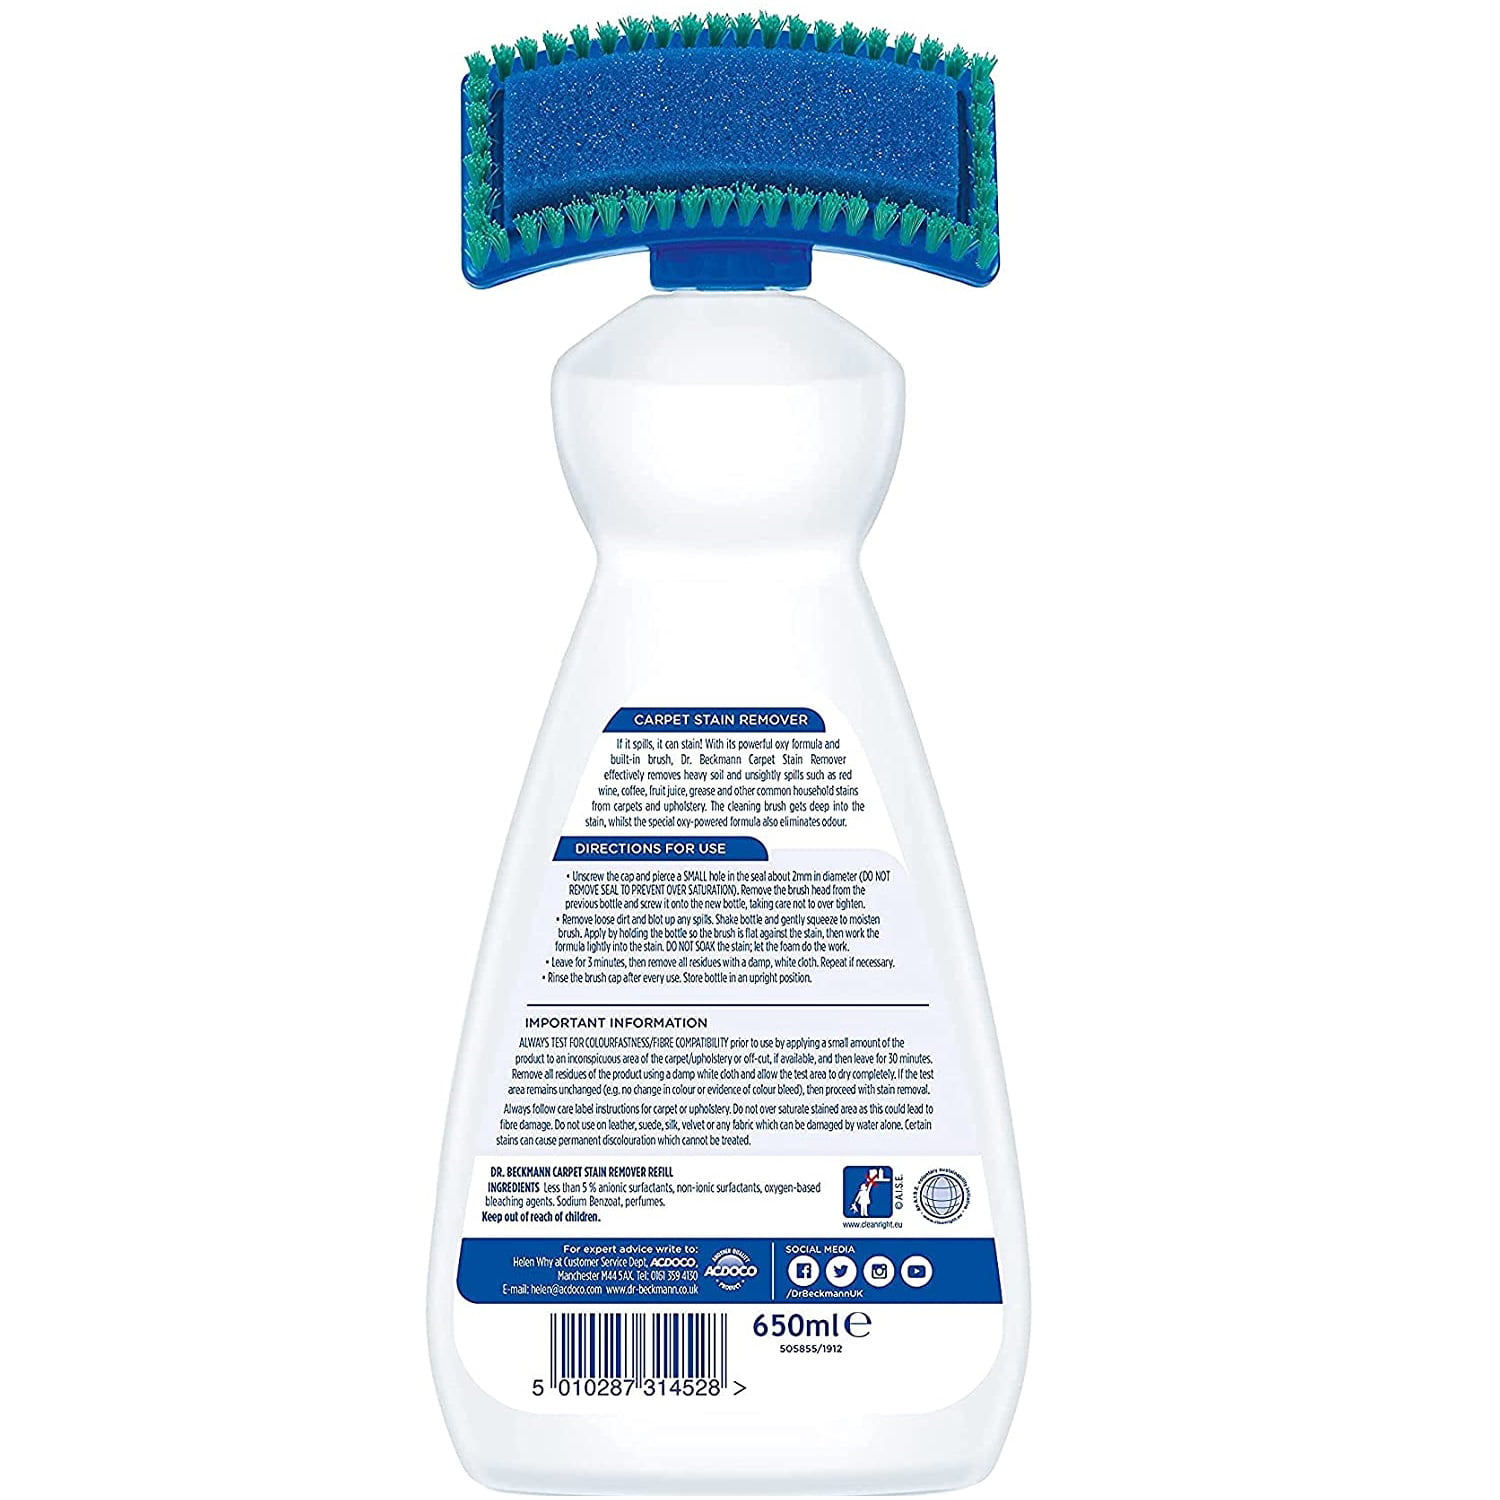 Dr. Beckmann Carpet Stain remover with cleaning - 650ml of - Walmart.com